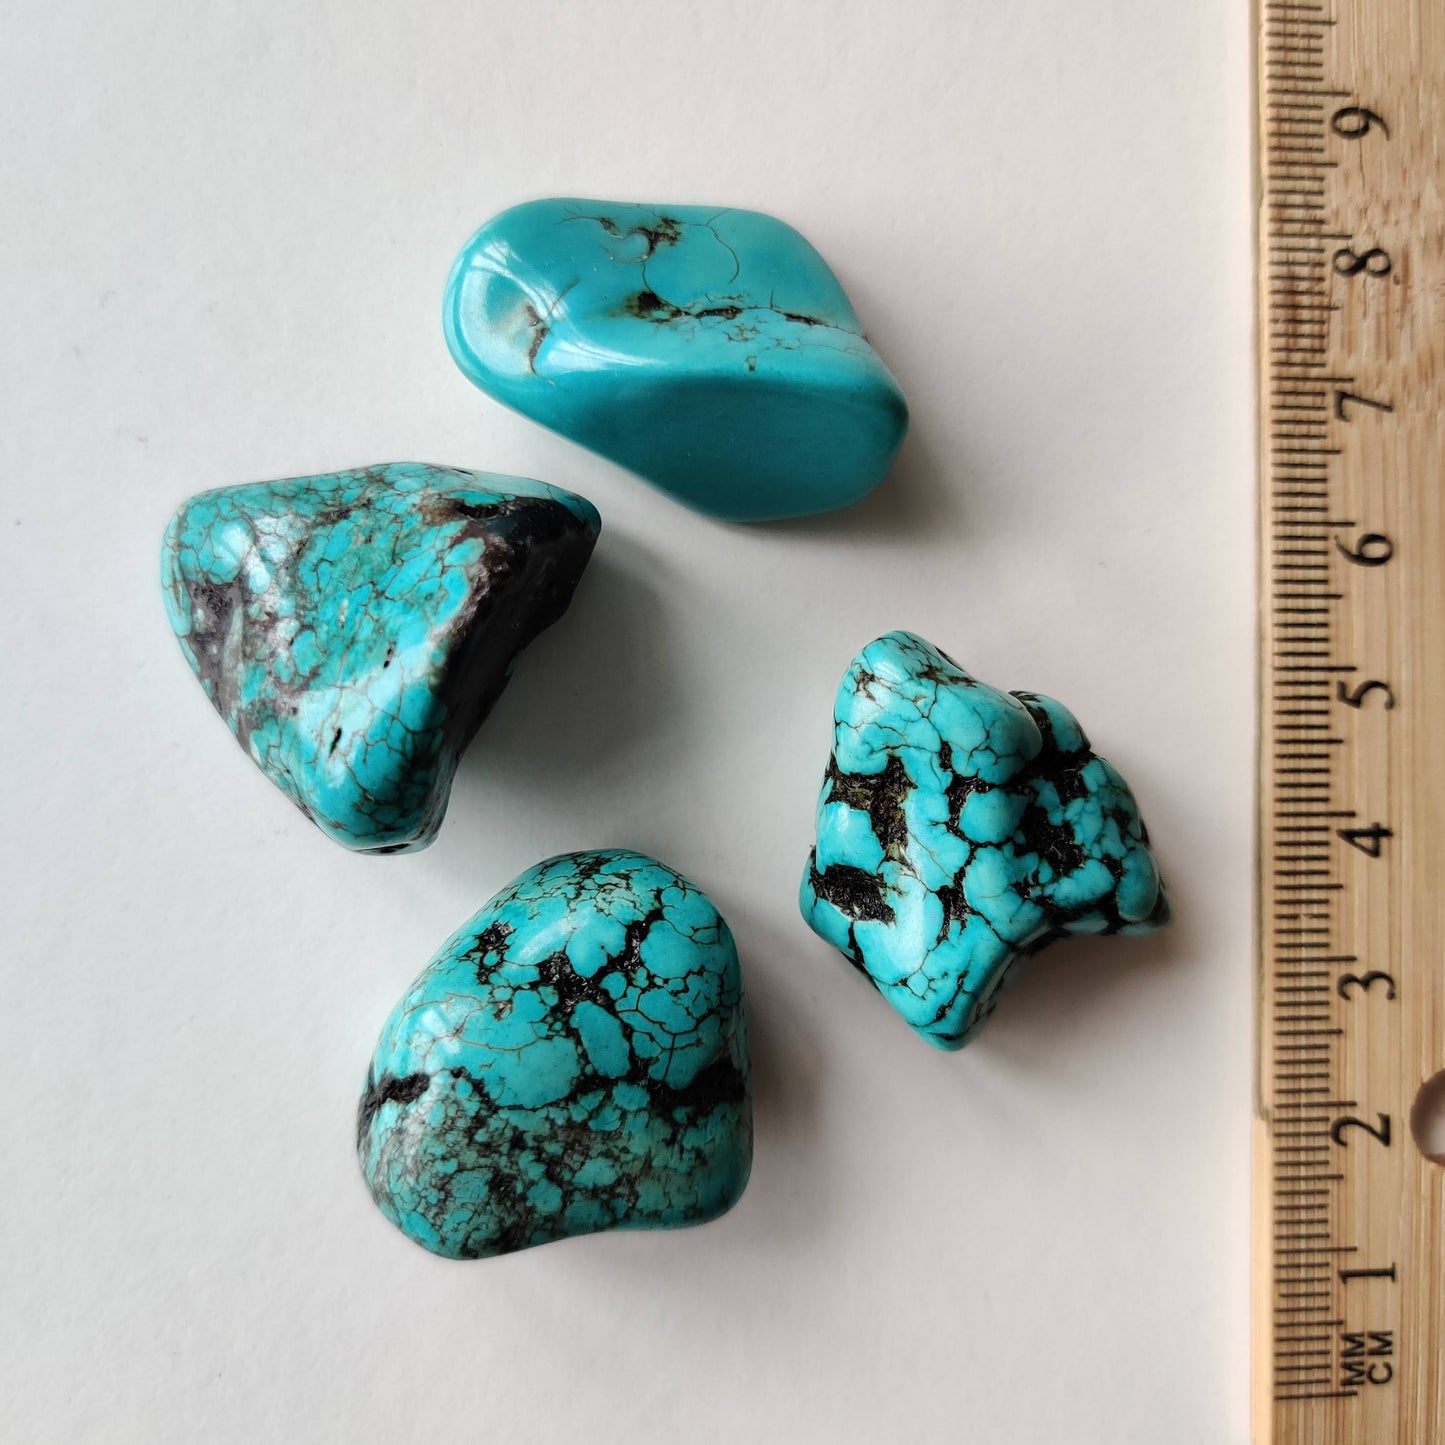 Turquoise Tumbled Crystal - Rivendell Shop